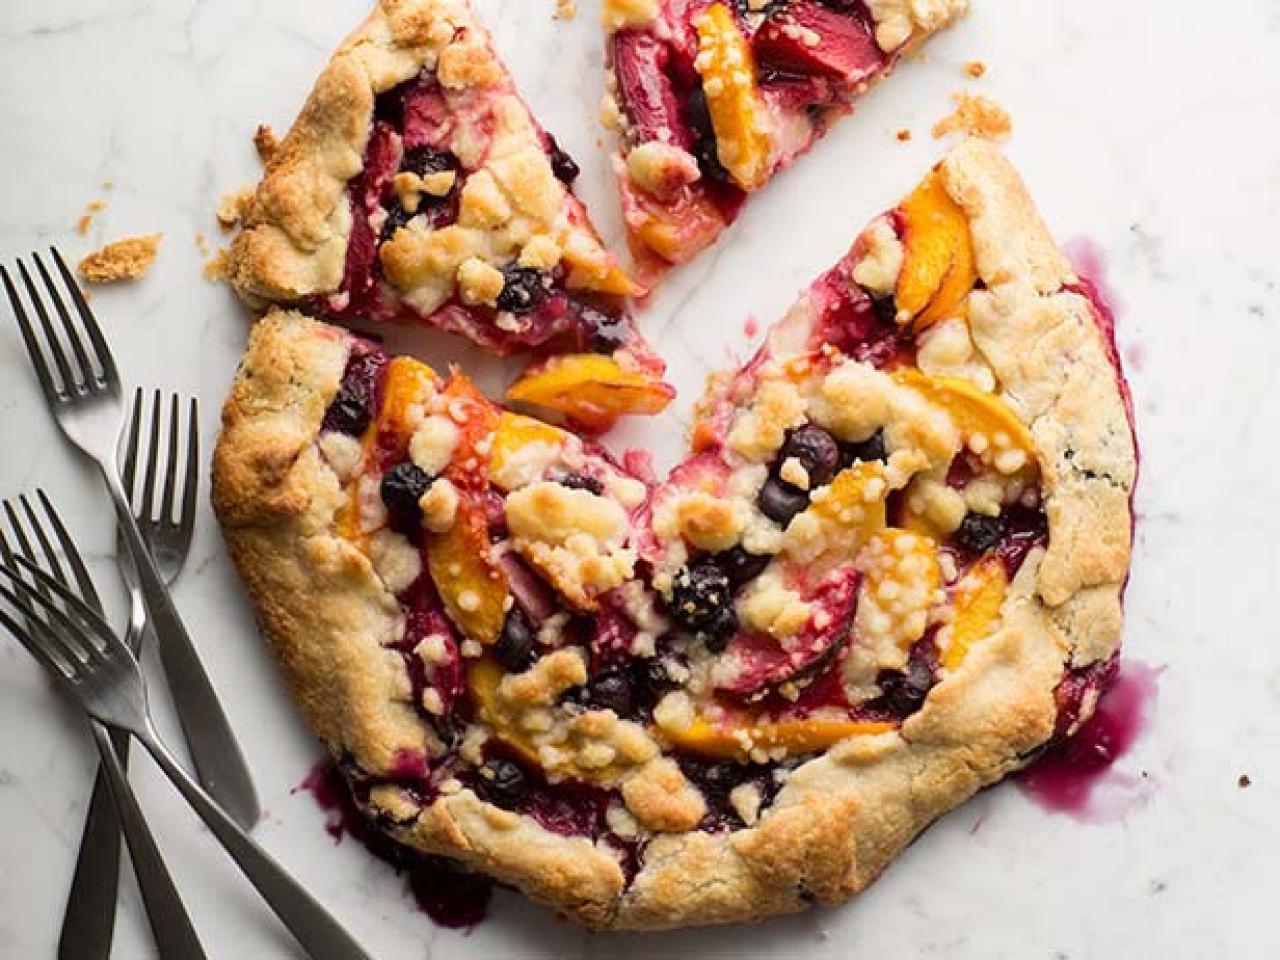 Summer Fruit Pie And Tart Recipes — The Only Reason To Turn On Your